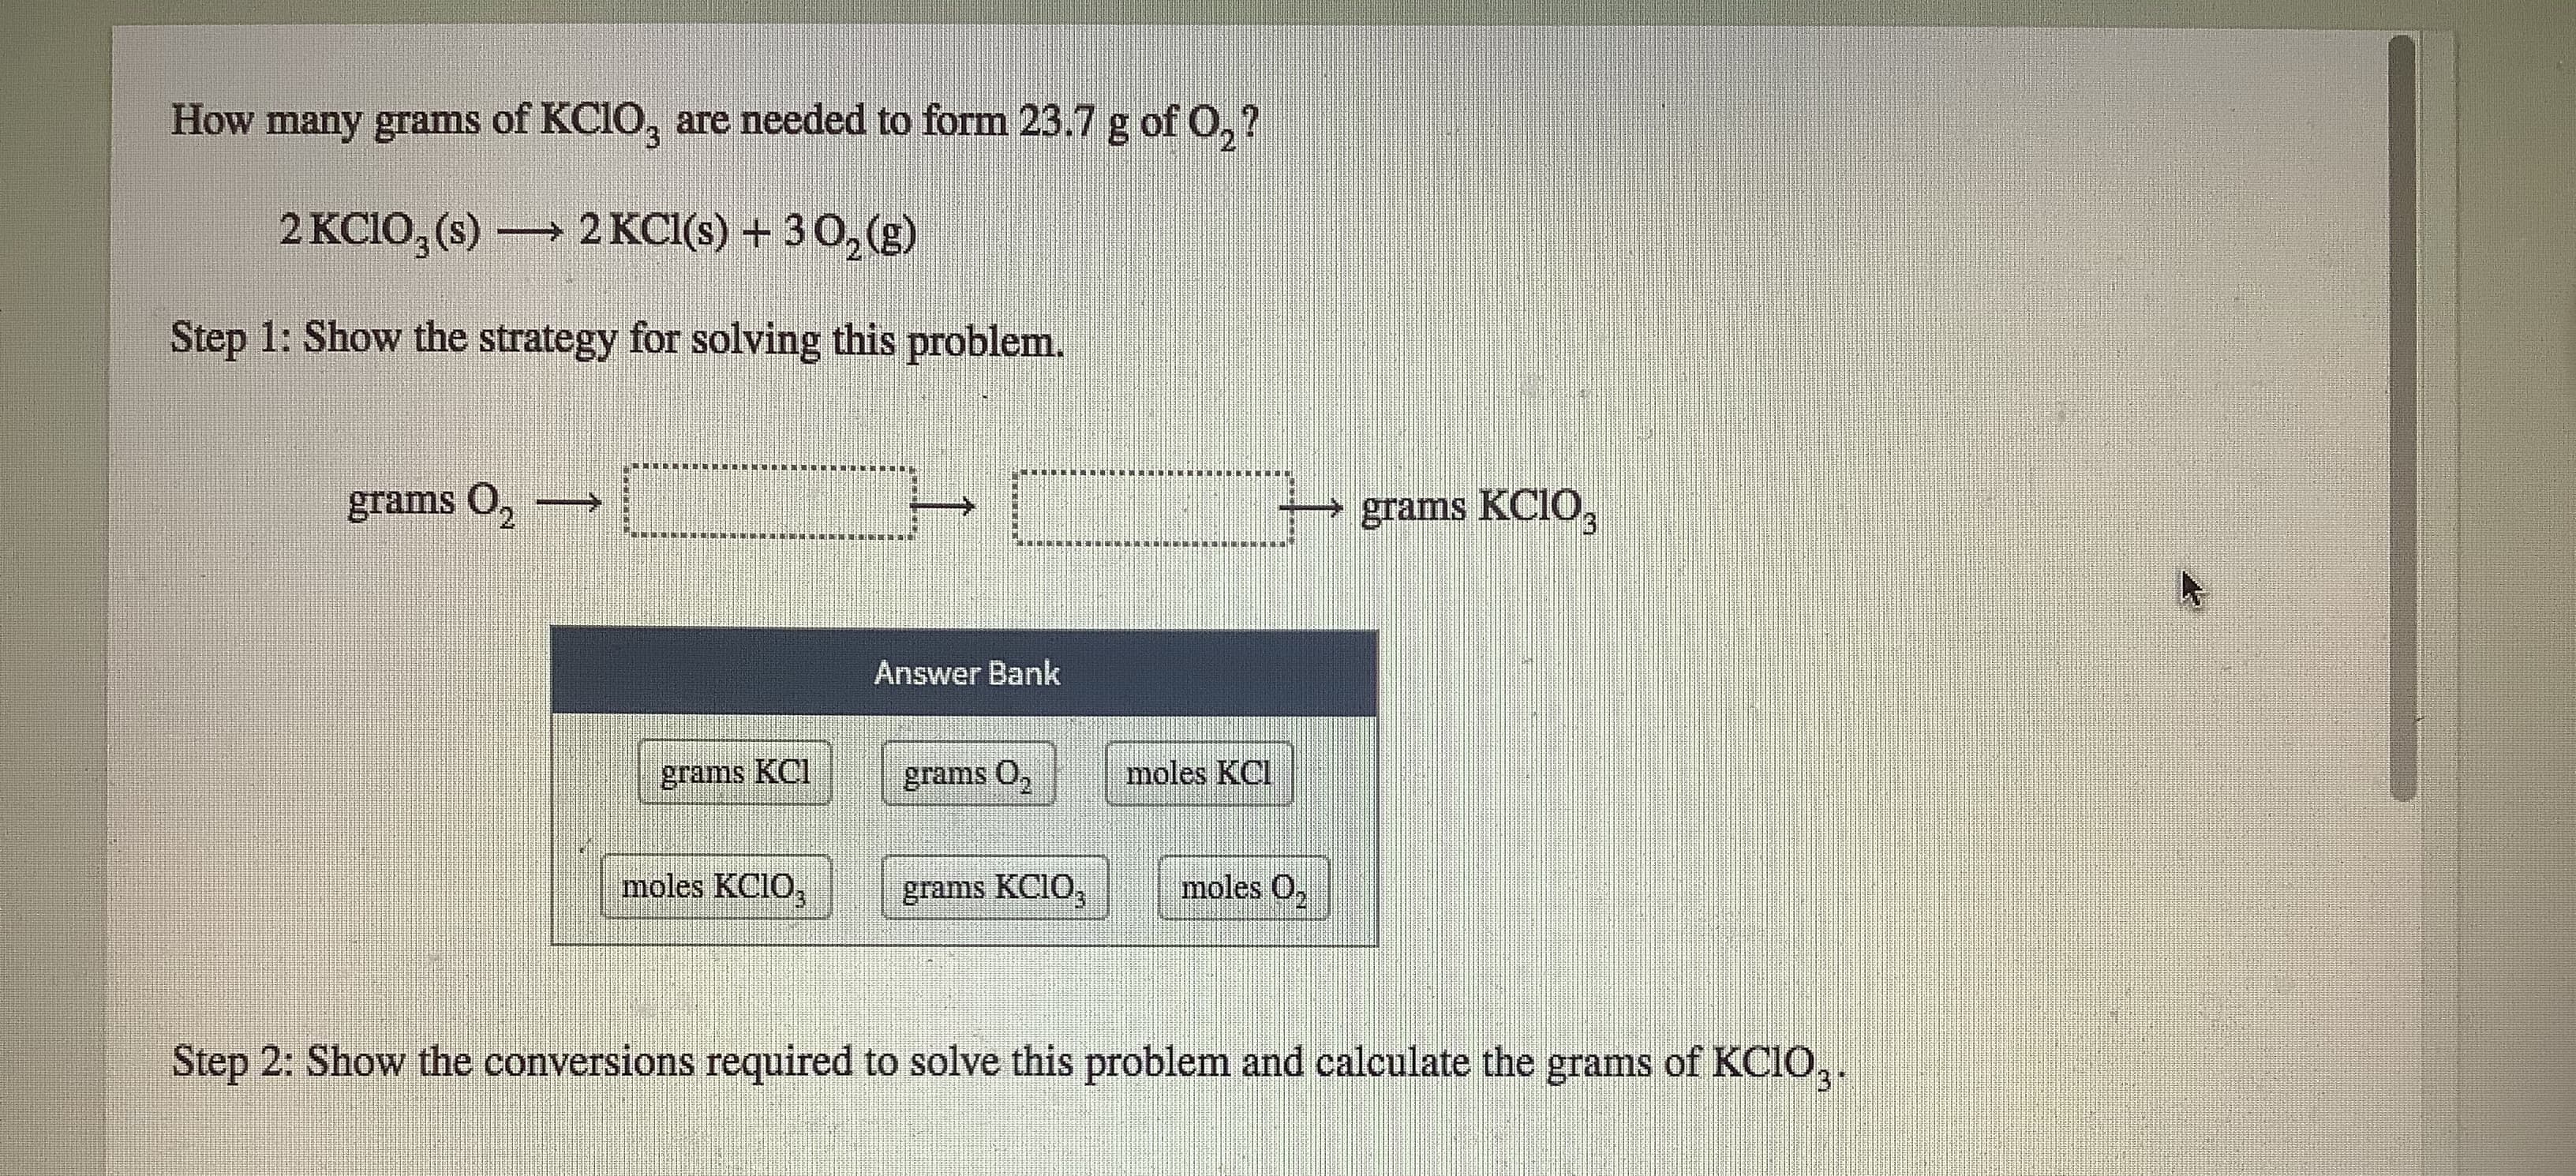 How many grams of KC1O, are needod to form 23.7 g of 0,7
2 KCIO, (s) → 2 KCI() + 30 (3)
Step 1: Show the strategy for solving this problem.
grums 0,
grams KCIO,
